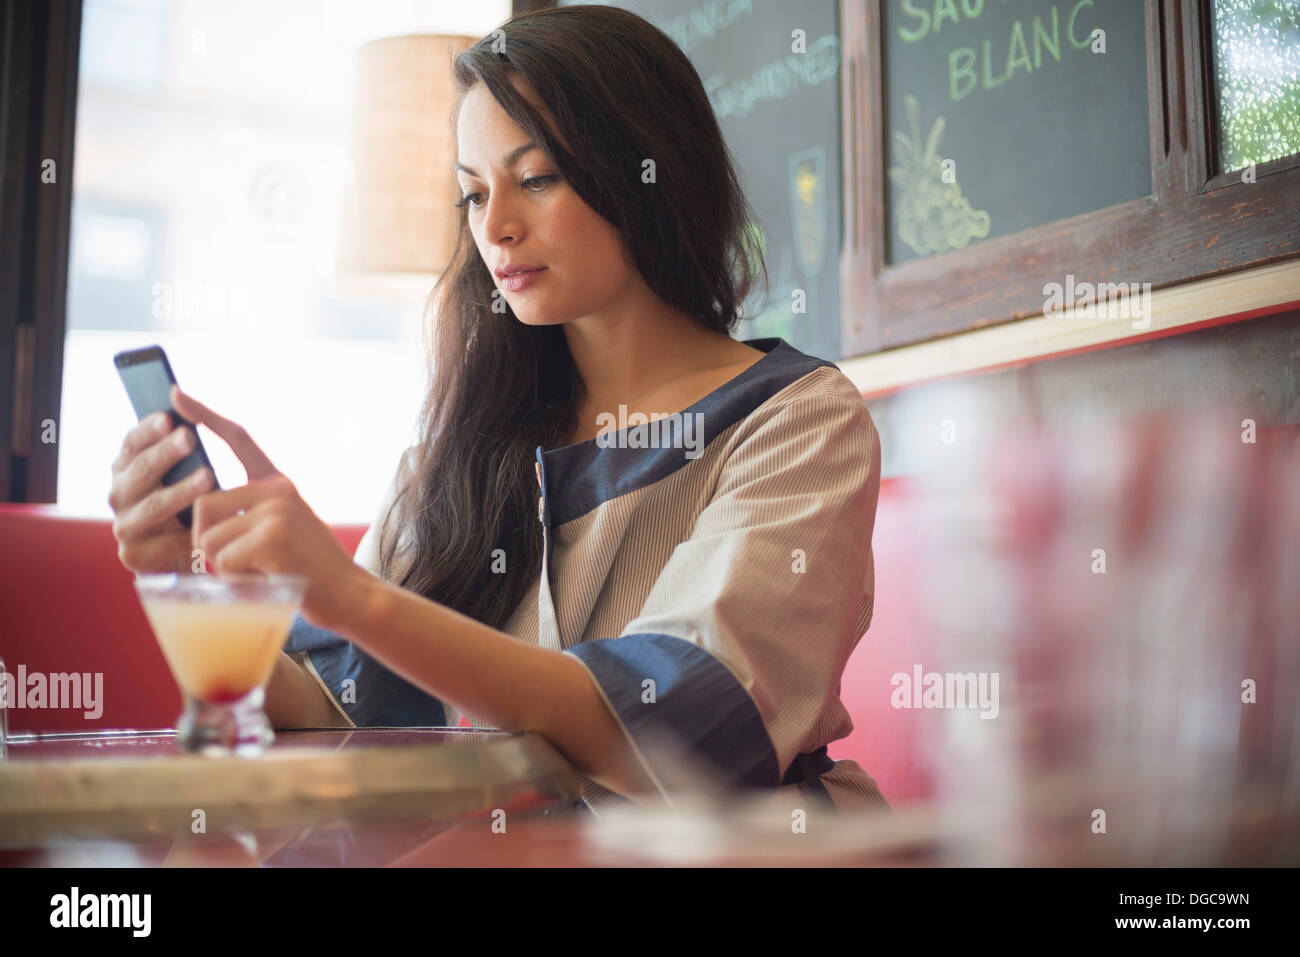 Mid adult women using mobile phone in restaurant Stock Photo